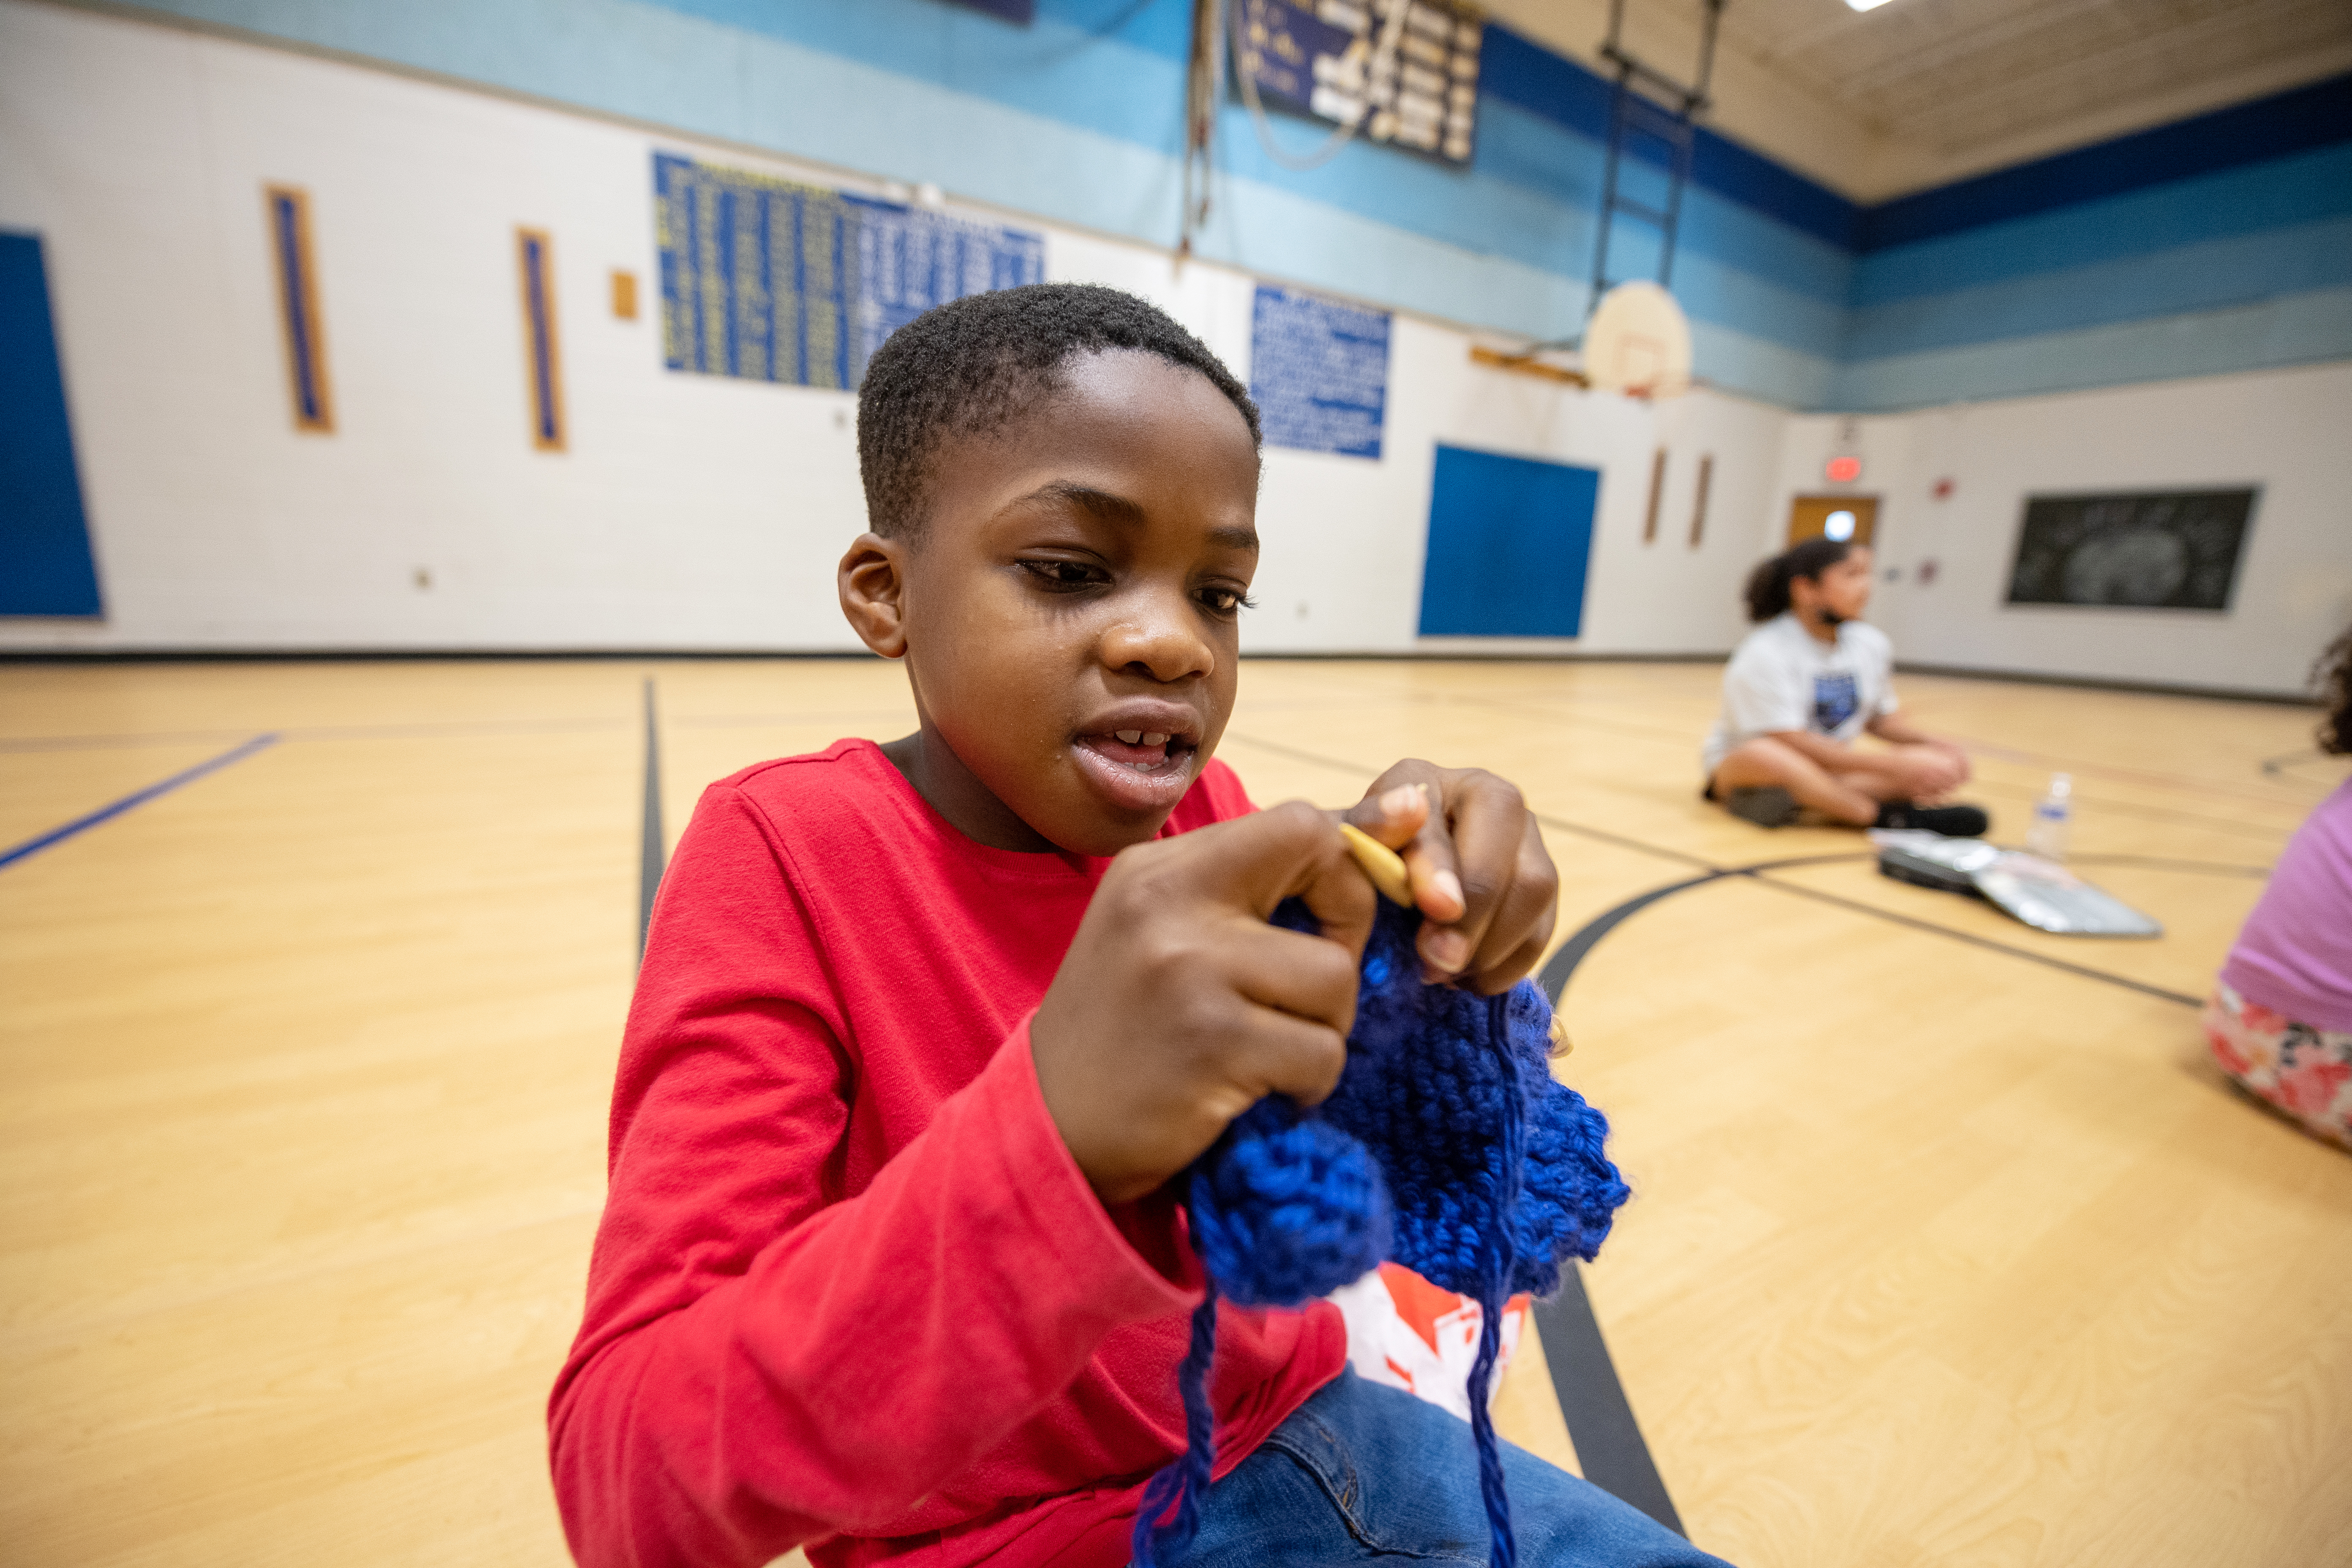 A third-grader at Little Run Elementary continues work on a scarf he has learned to knit through his school's program.